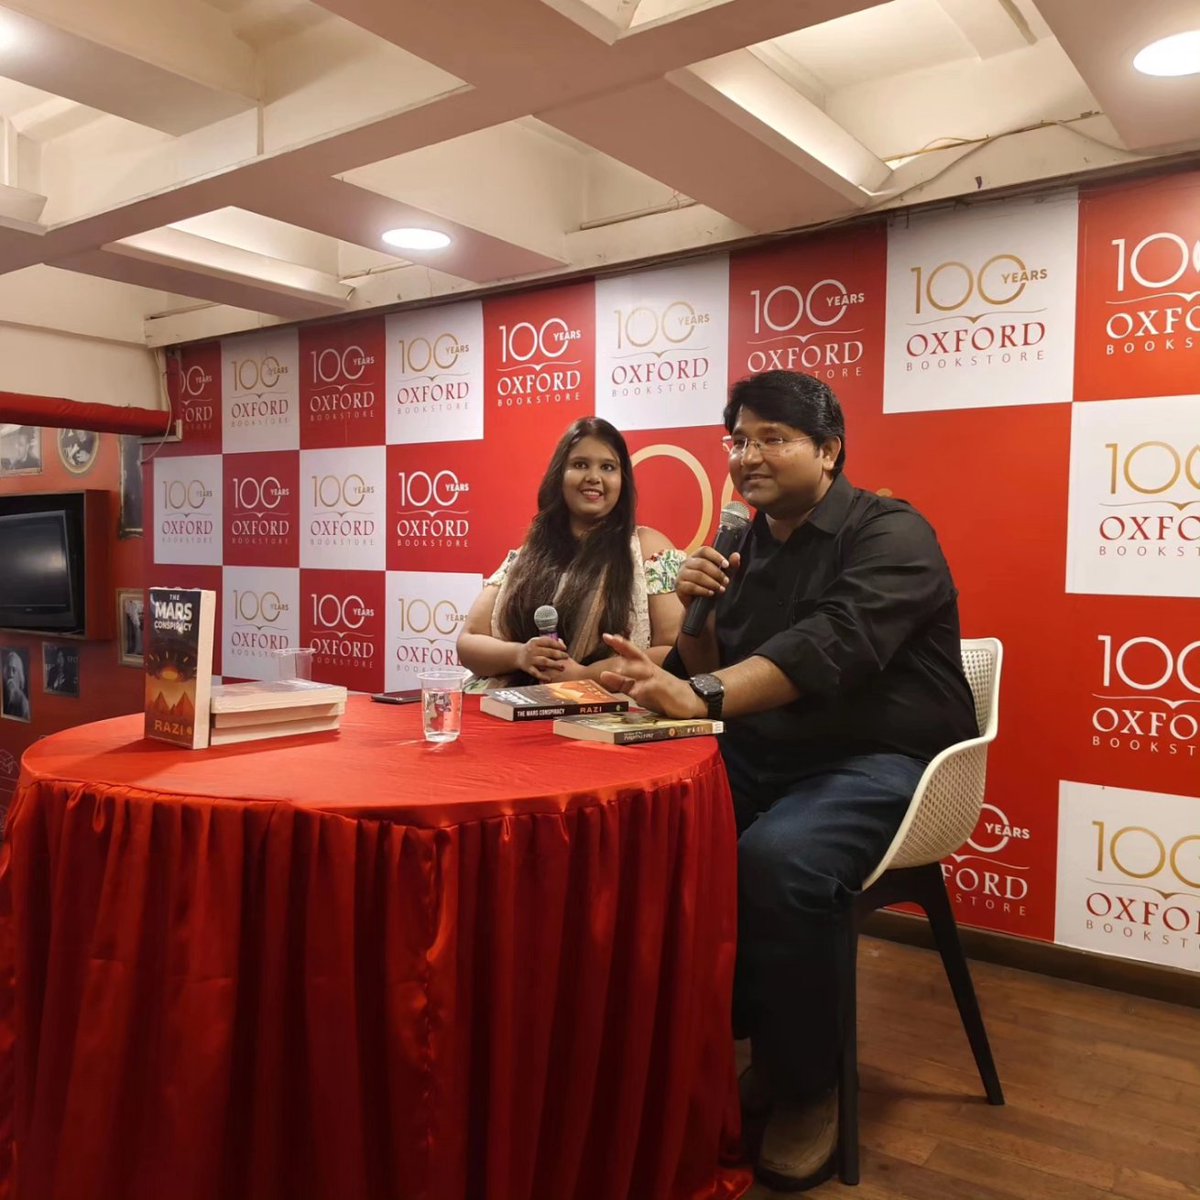 #TheMarsConspiracy #Oxfordbookstore #Kolkatabookworms #Readsithisbookclub
What more can you wish for when your stories find a place in some very beautiful heart?!💐

A fun & inspiring book discussion about 'The Mars Conspiracy' at Oxford bookstore, Park Street, Kolkata.💐